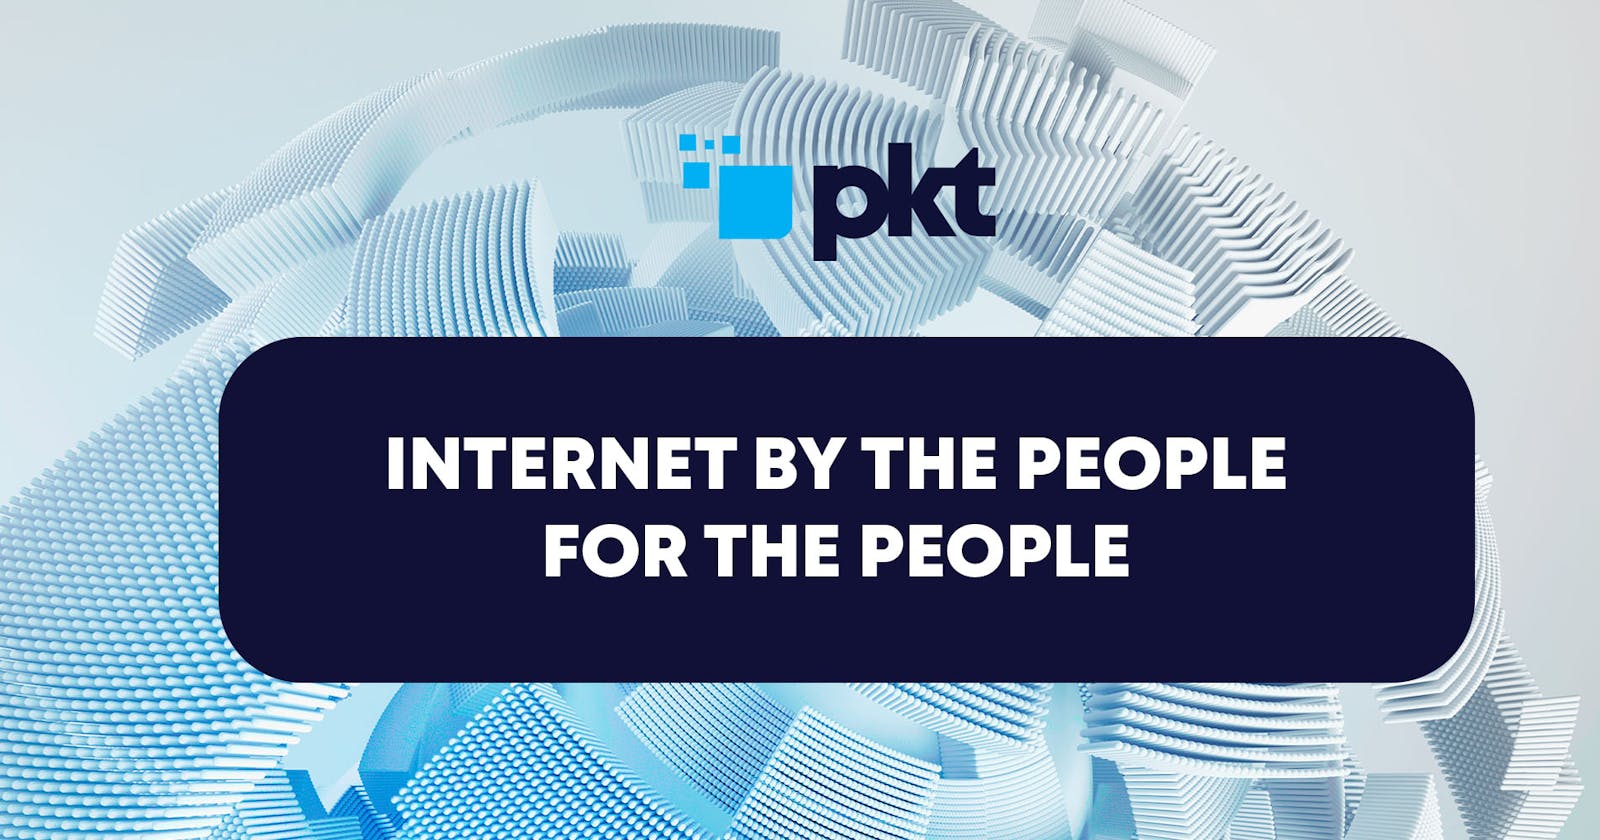 PKT: The First Bandwidth-Based Proof-of-Work Blockchain Aimed at Decentralizing Access to the Internet.